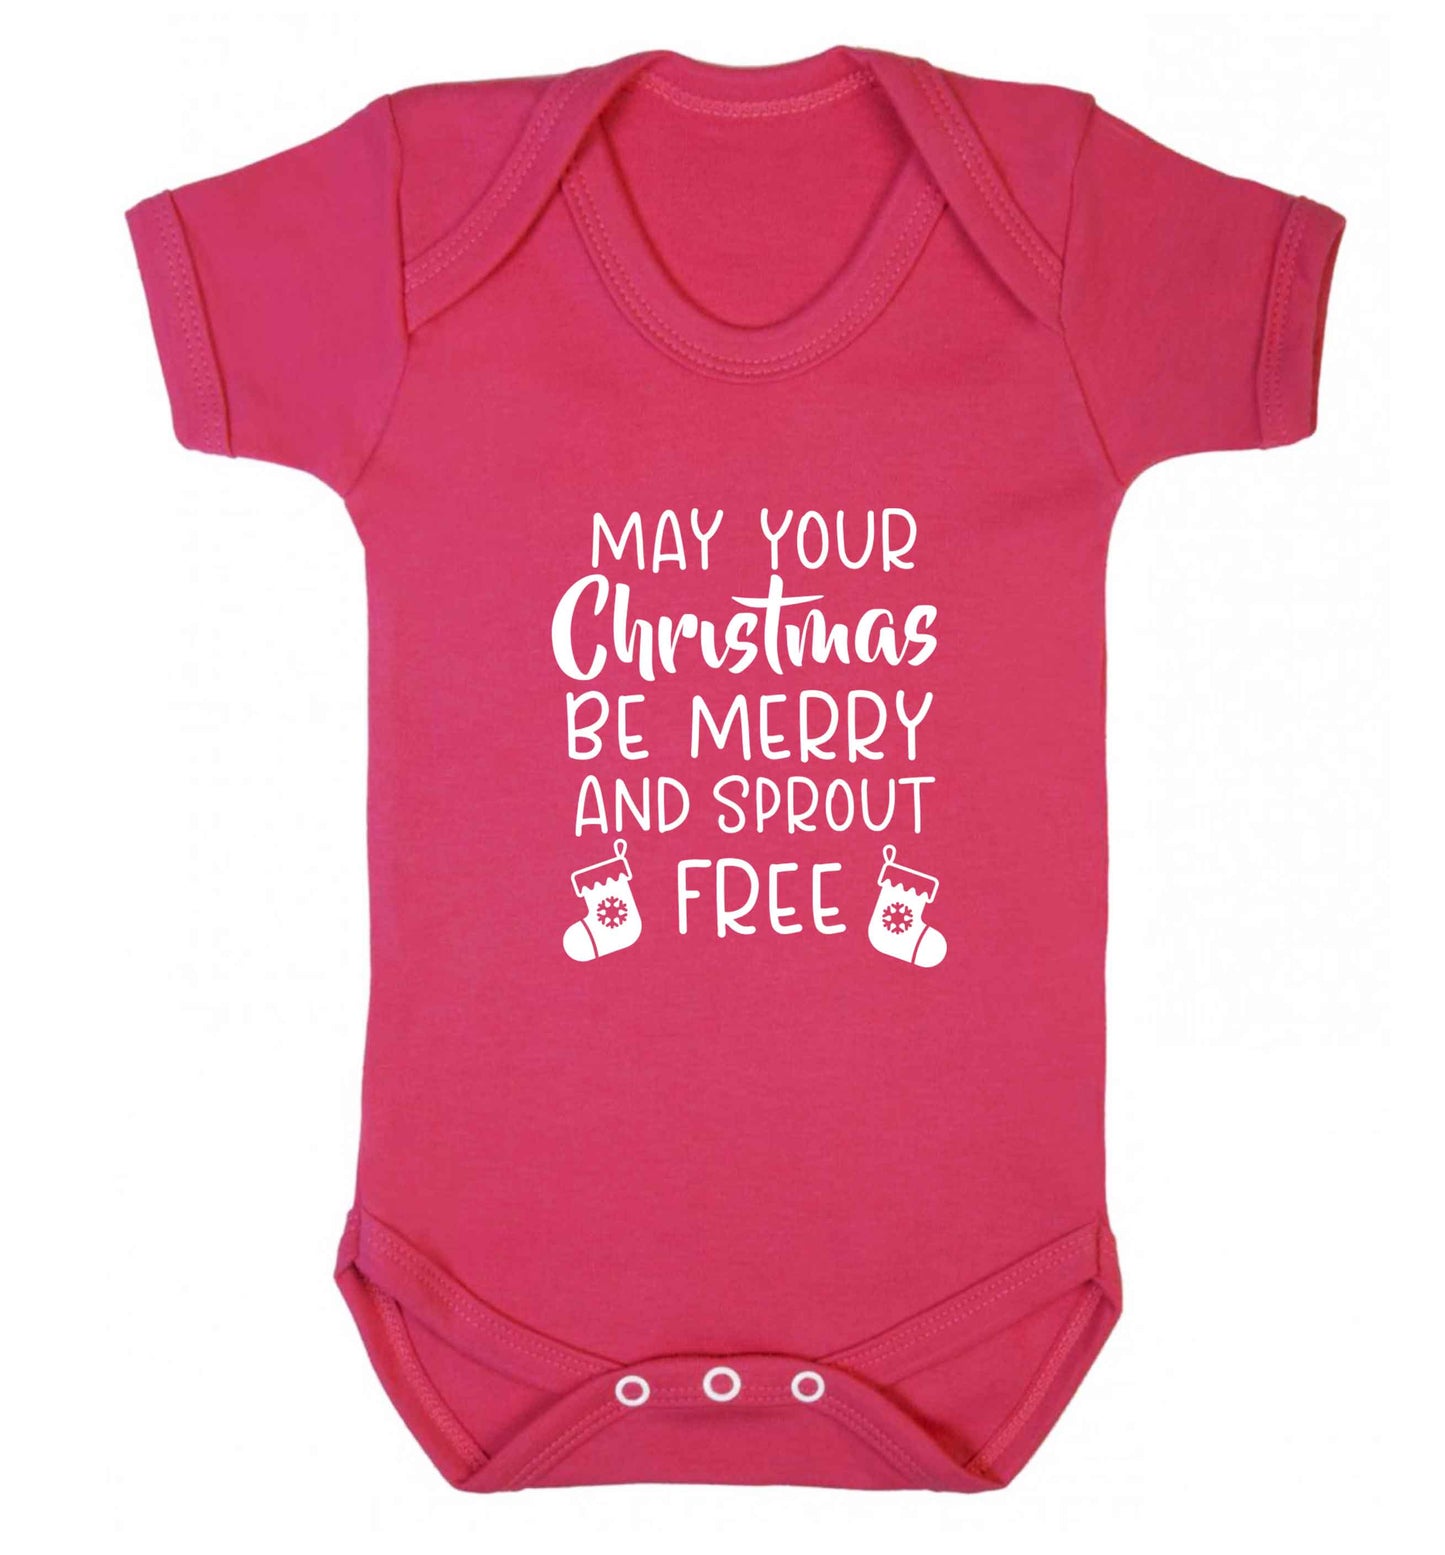 May your Christmas be merry and sprout free baby vest dark pink 18-24 months